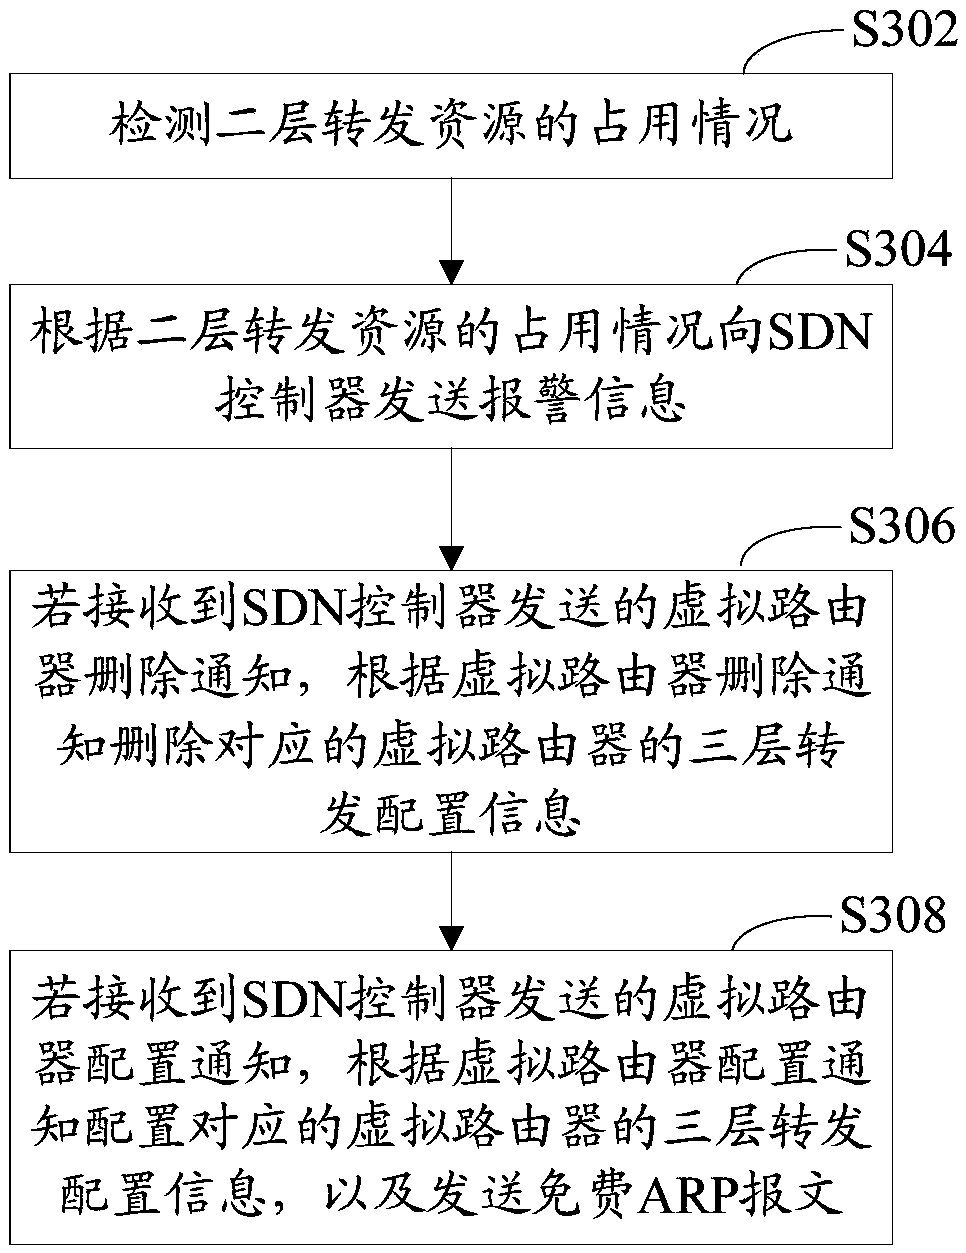 Method and system for controlling gateway mode, SDN controller and access equipment